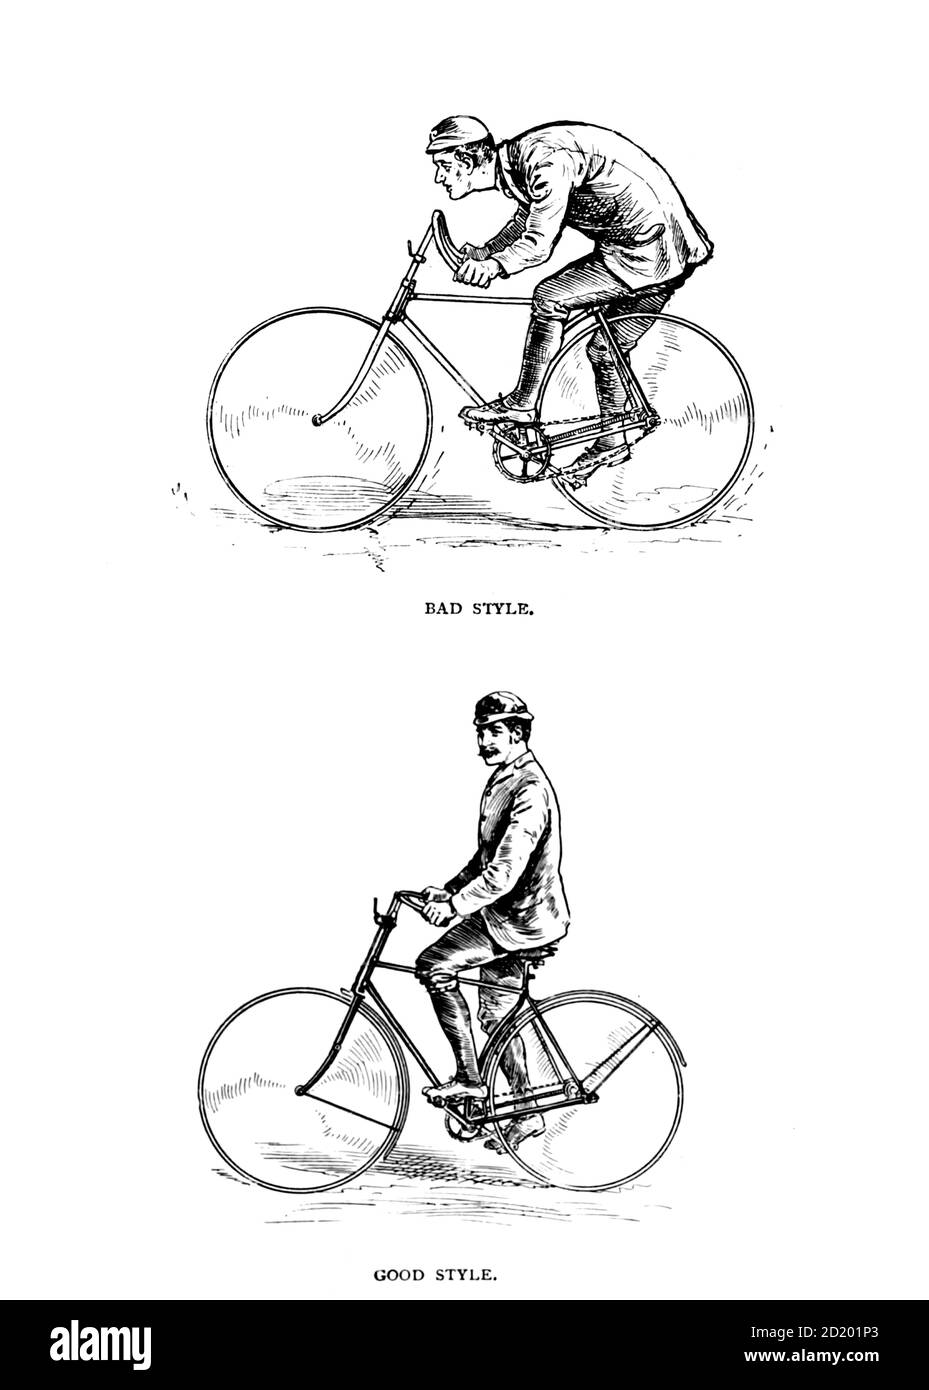 Good and Bad cycling Style from 'Cycling' by The right Hon. Earl of Albemarle, William Coutts Keppel, (1832-1894) and George Lacy Hillier (1856-1941); Joseph Pennell (1857-1926) Published by London and Bombay : Longmans, Green and co. in 1896. The Badminton Library Stock Photo